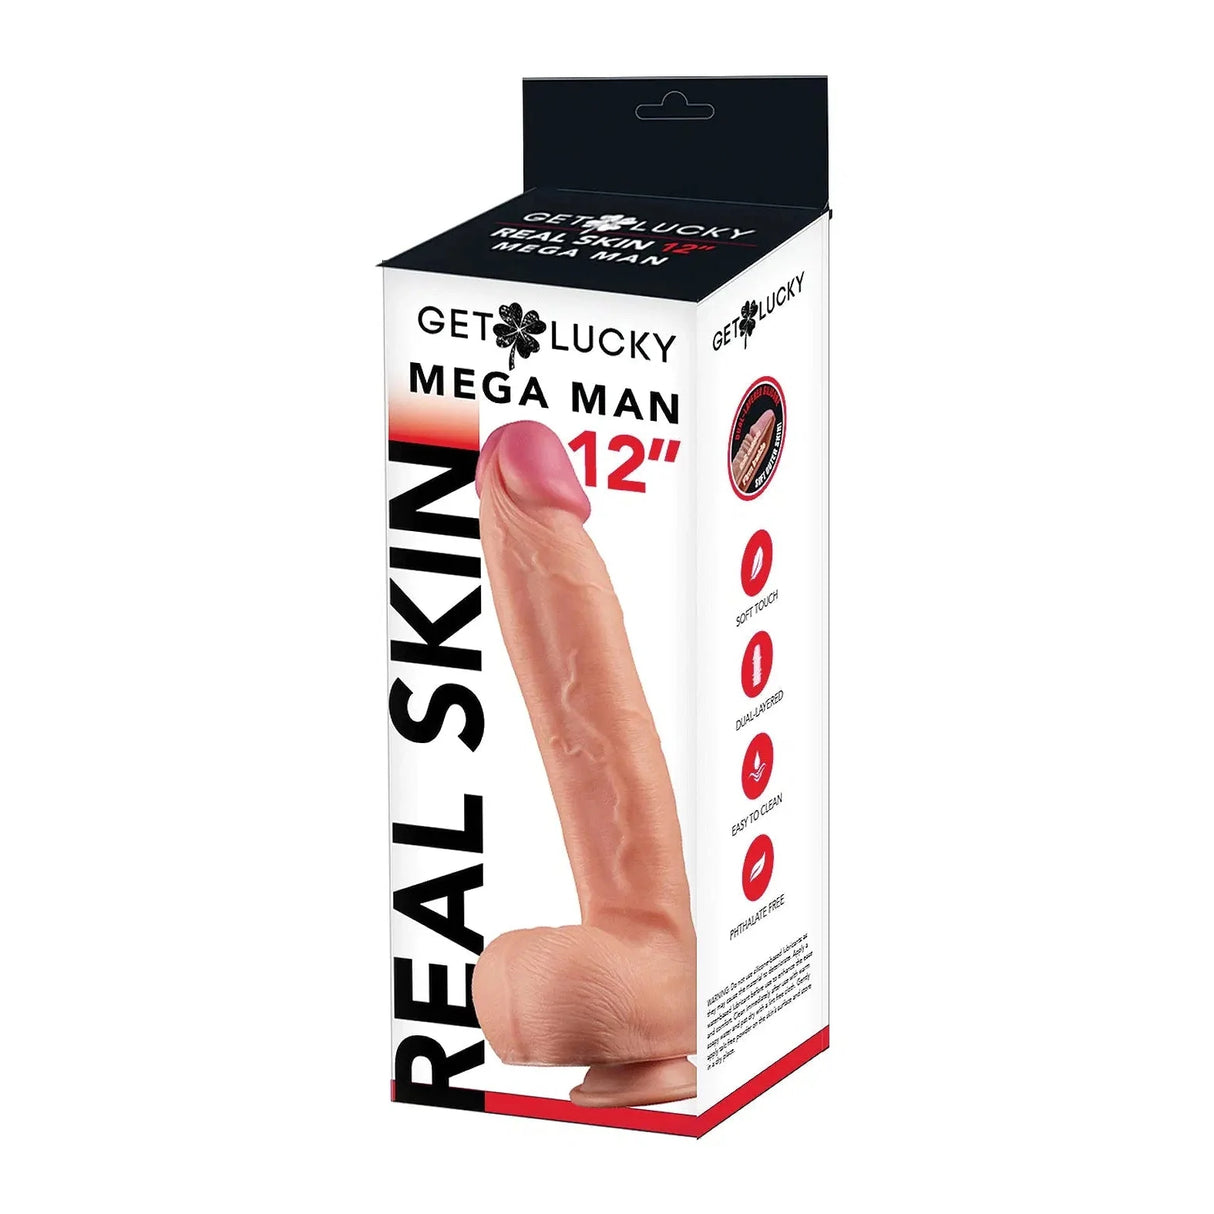 Voodoo Get Lucky 12 Inch Real Skin Dildo